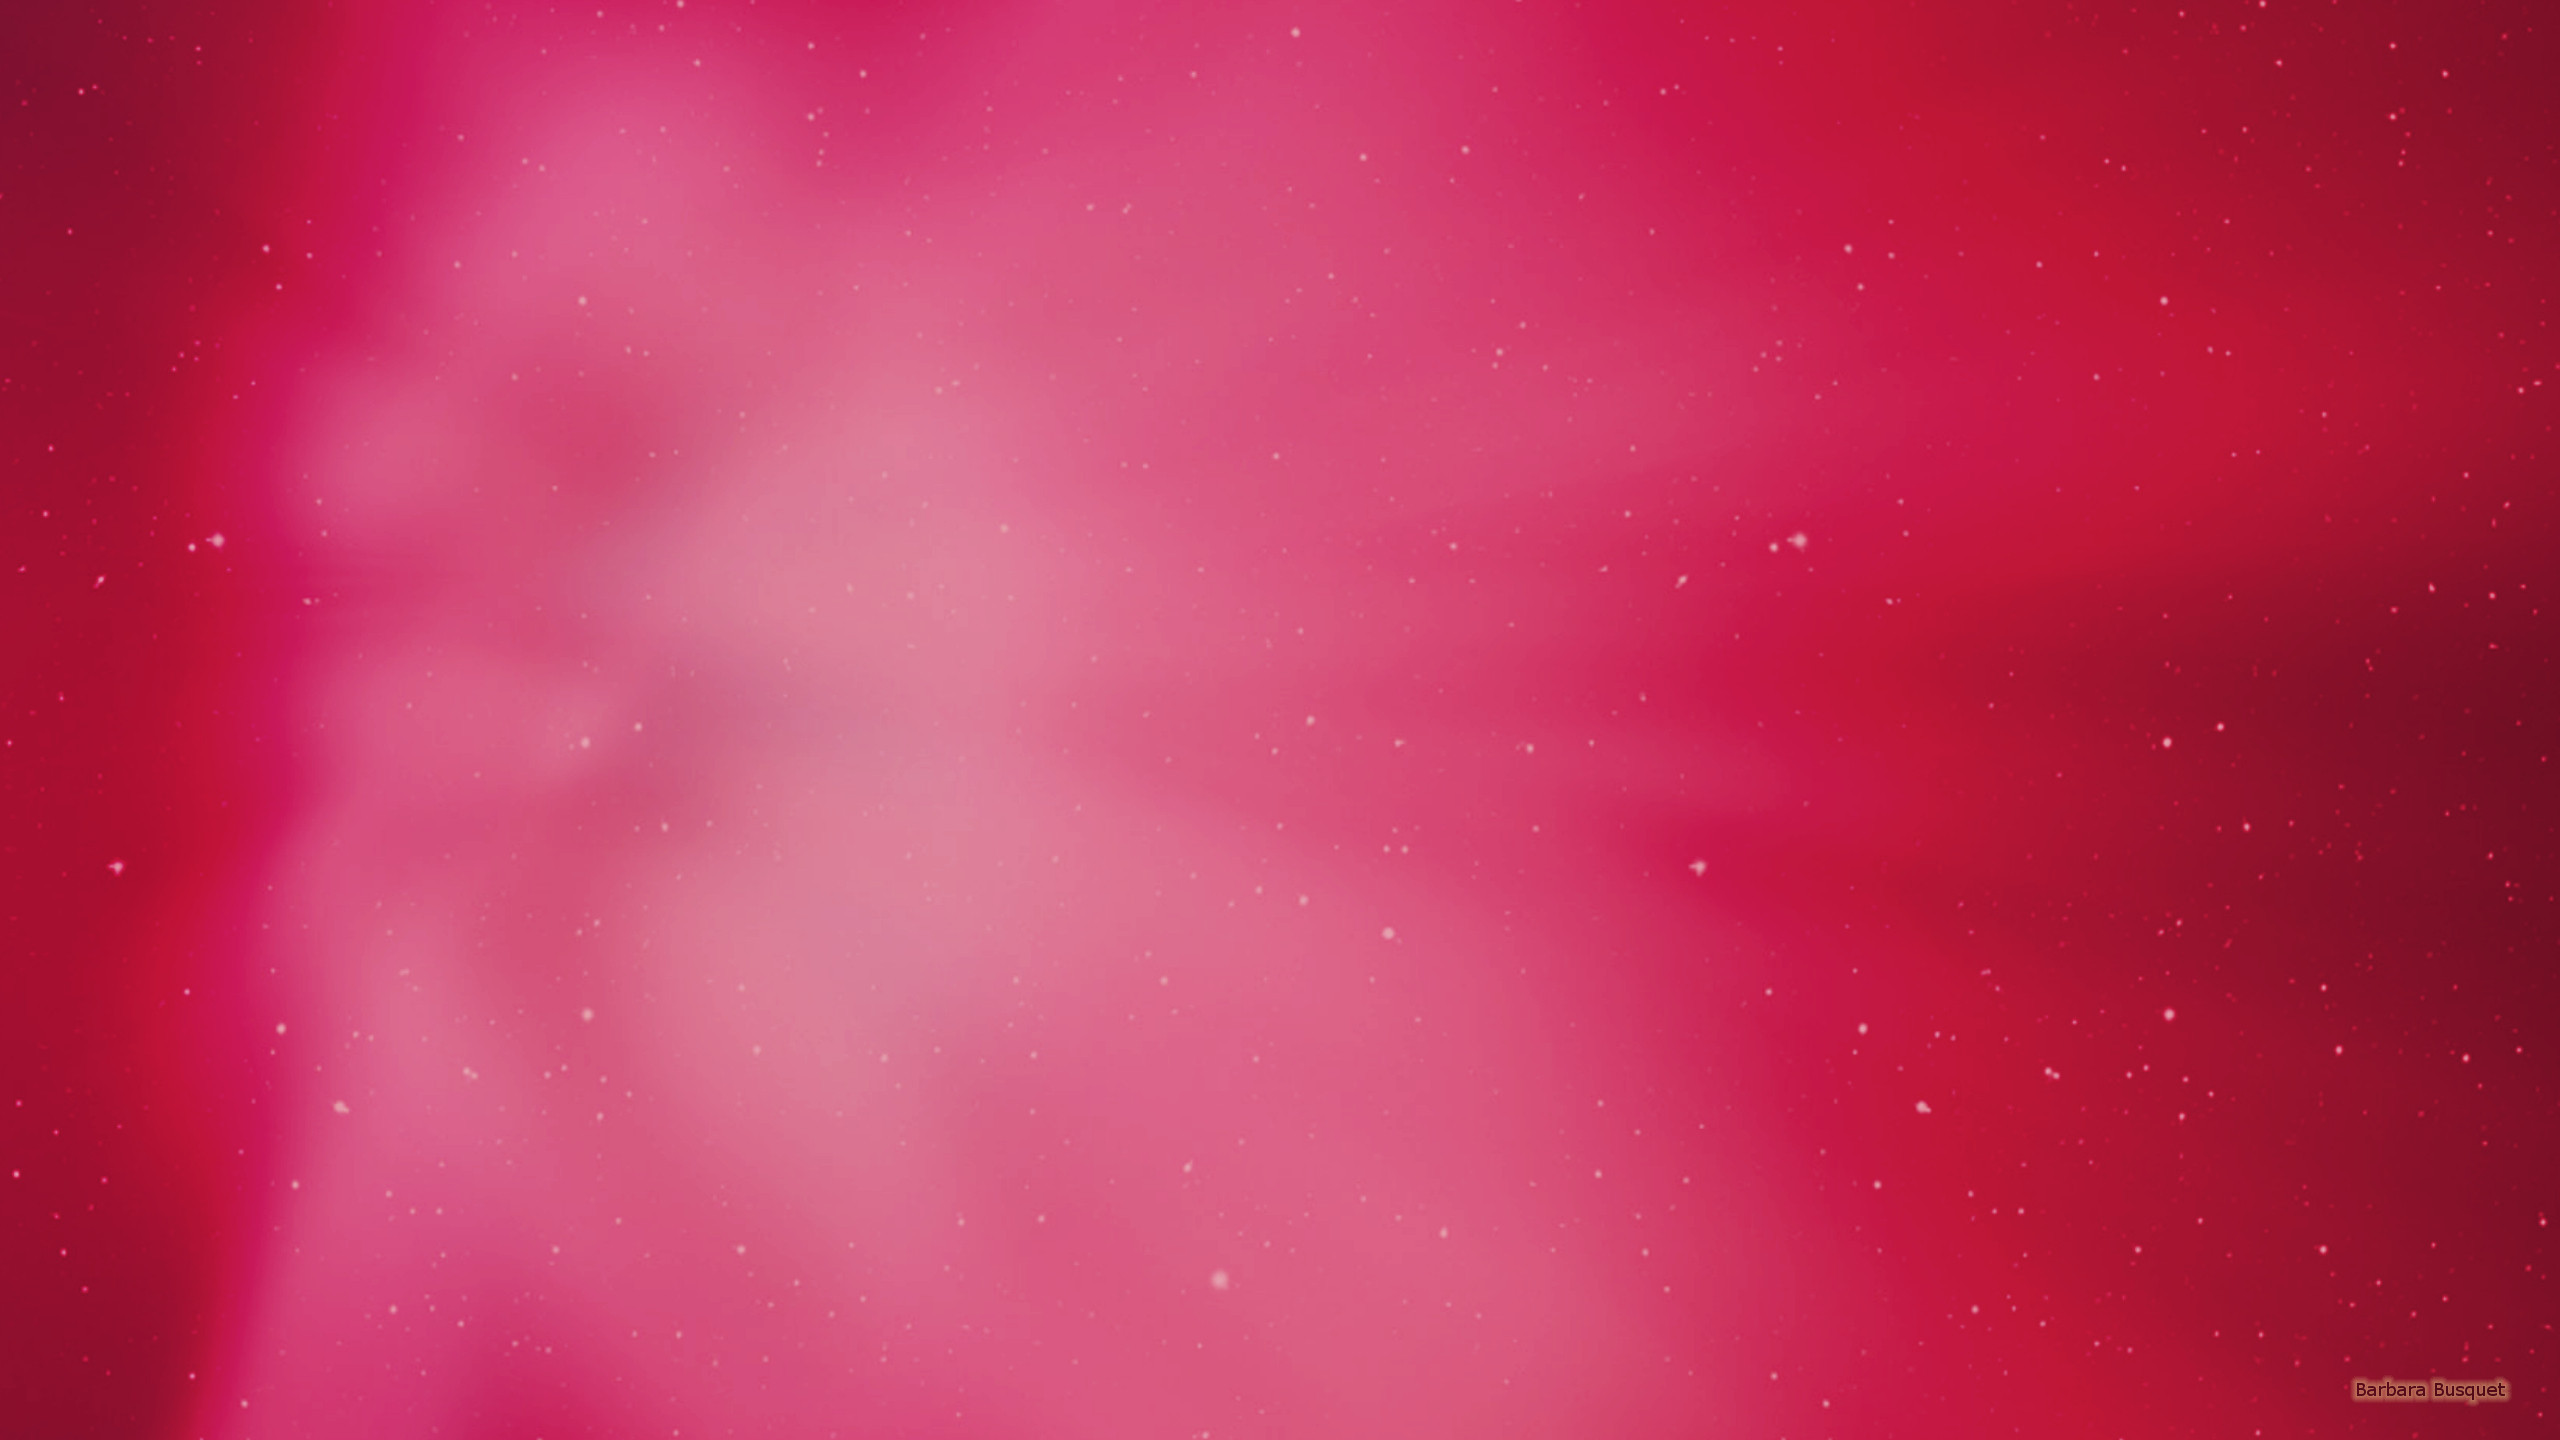 2560x1440 Red galaxy wallpaper with stars and gas clouds.